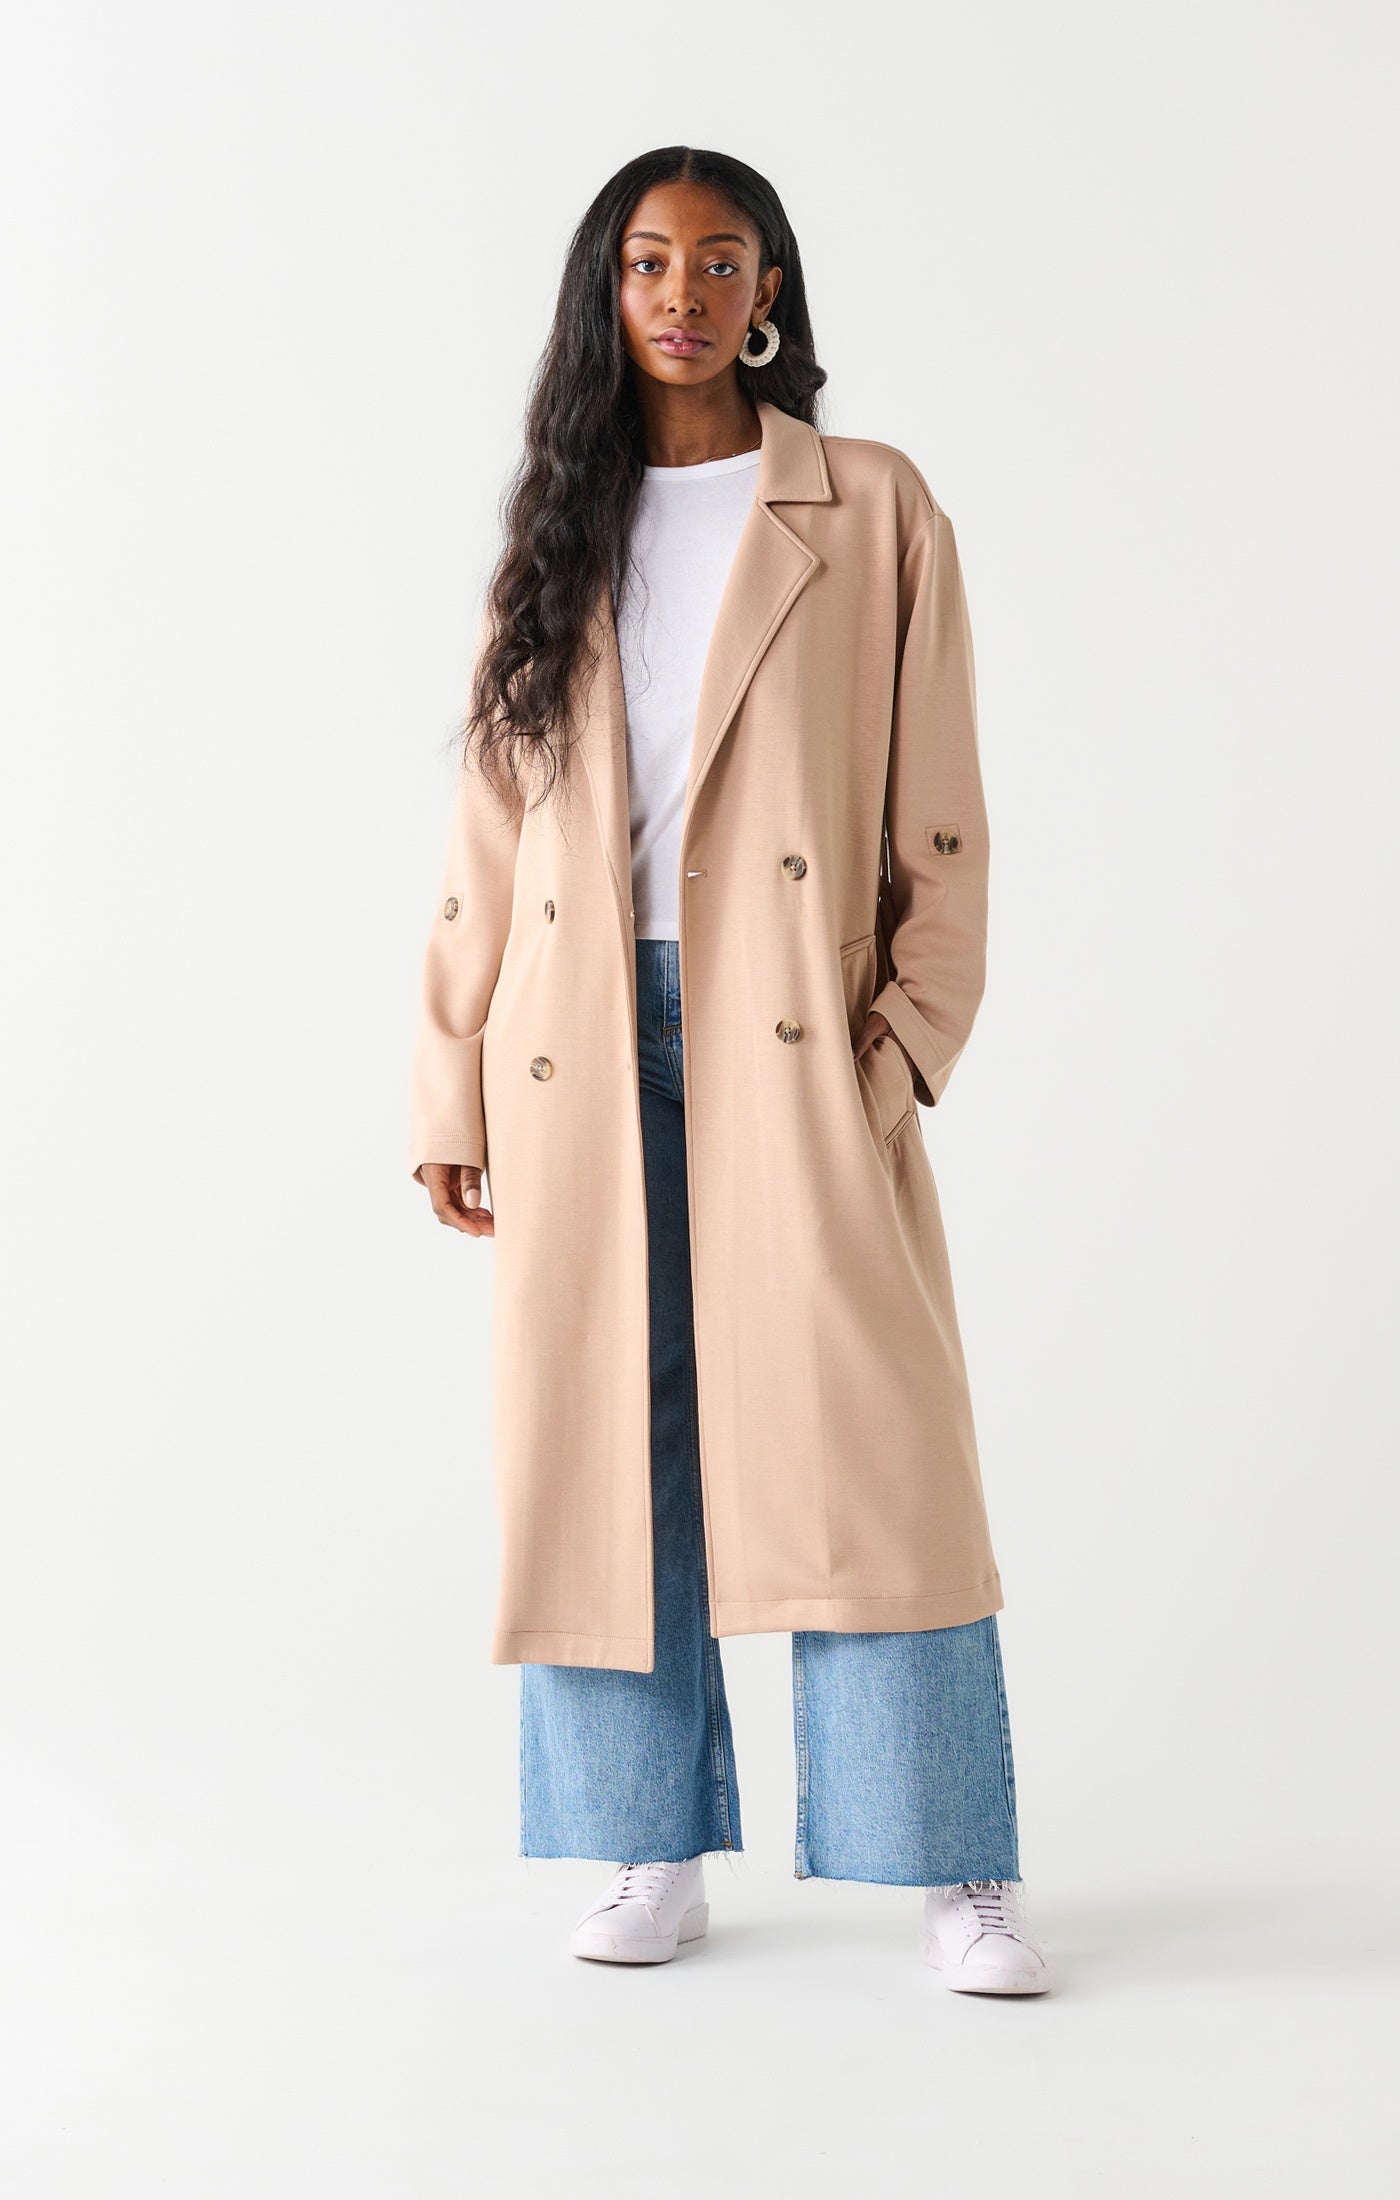 Double Breasted Knit Trench in Taupe by Dex